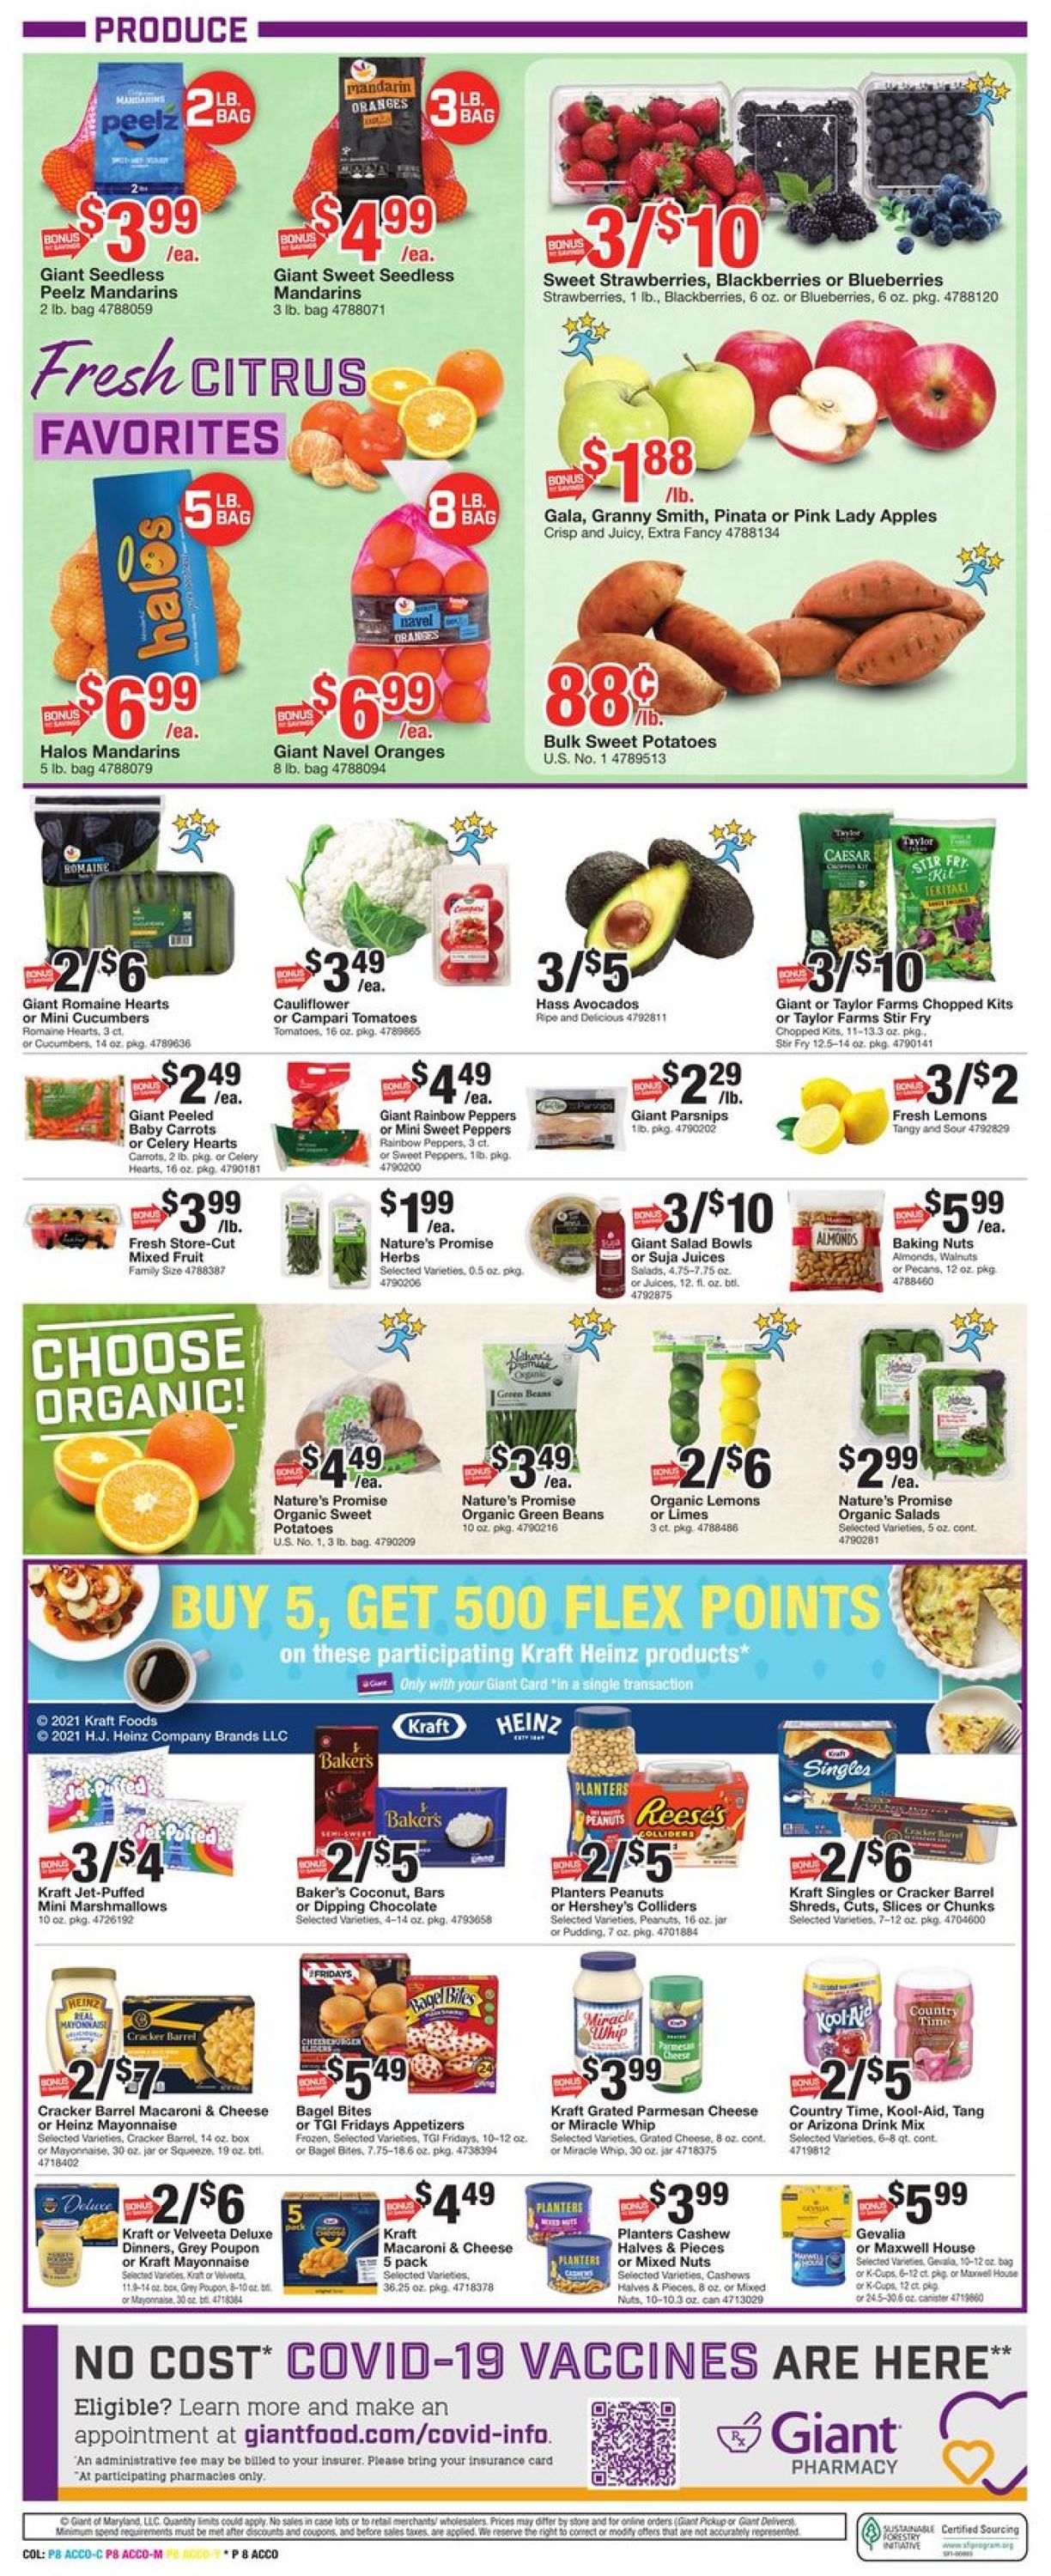 Giant Food - Easter 2021 Ad Weekly Ad Circular - valid 03/26-04/01/2021 (Page 10)